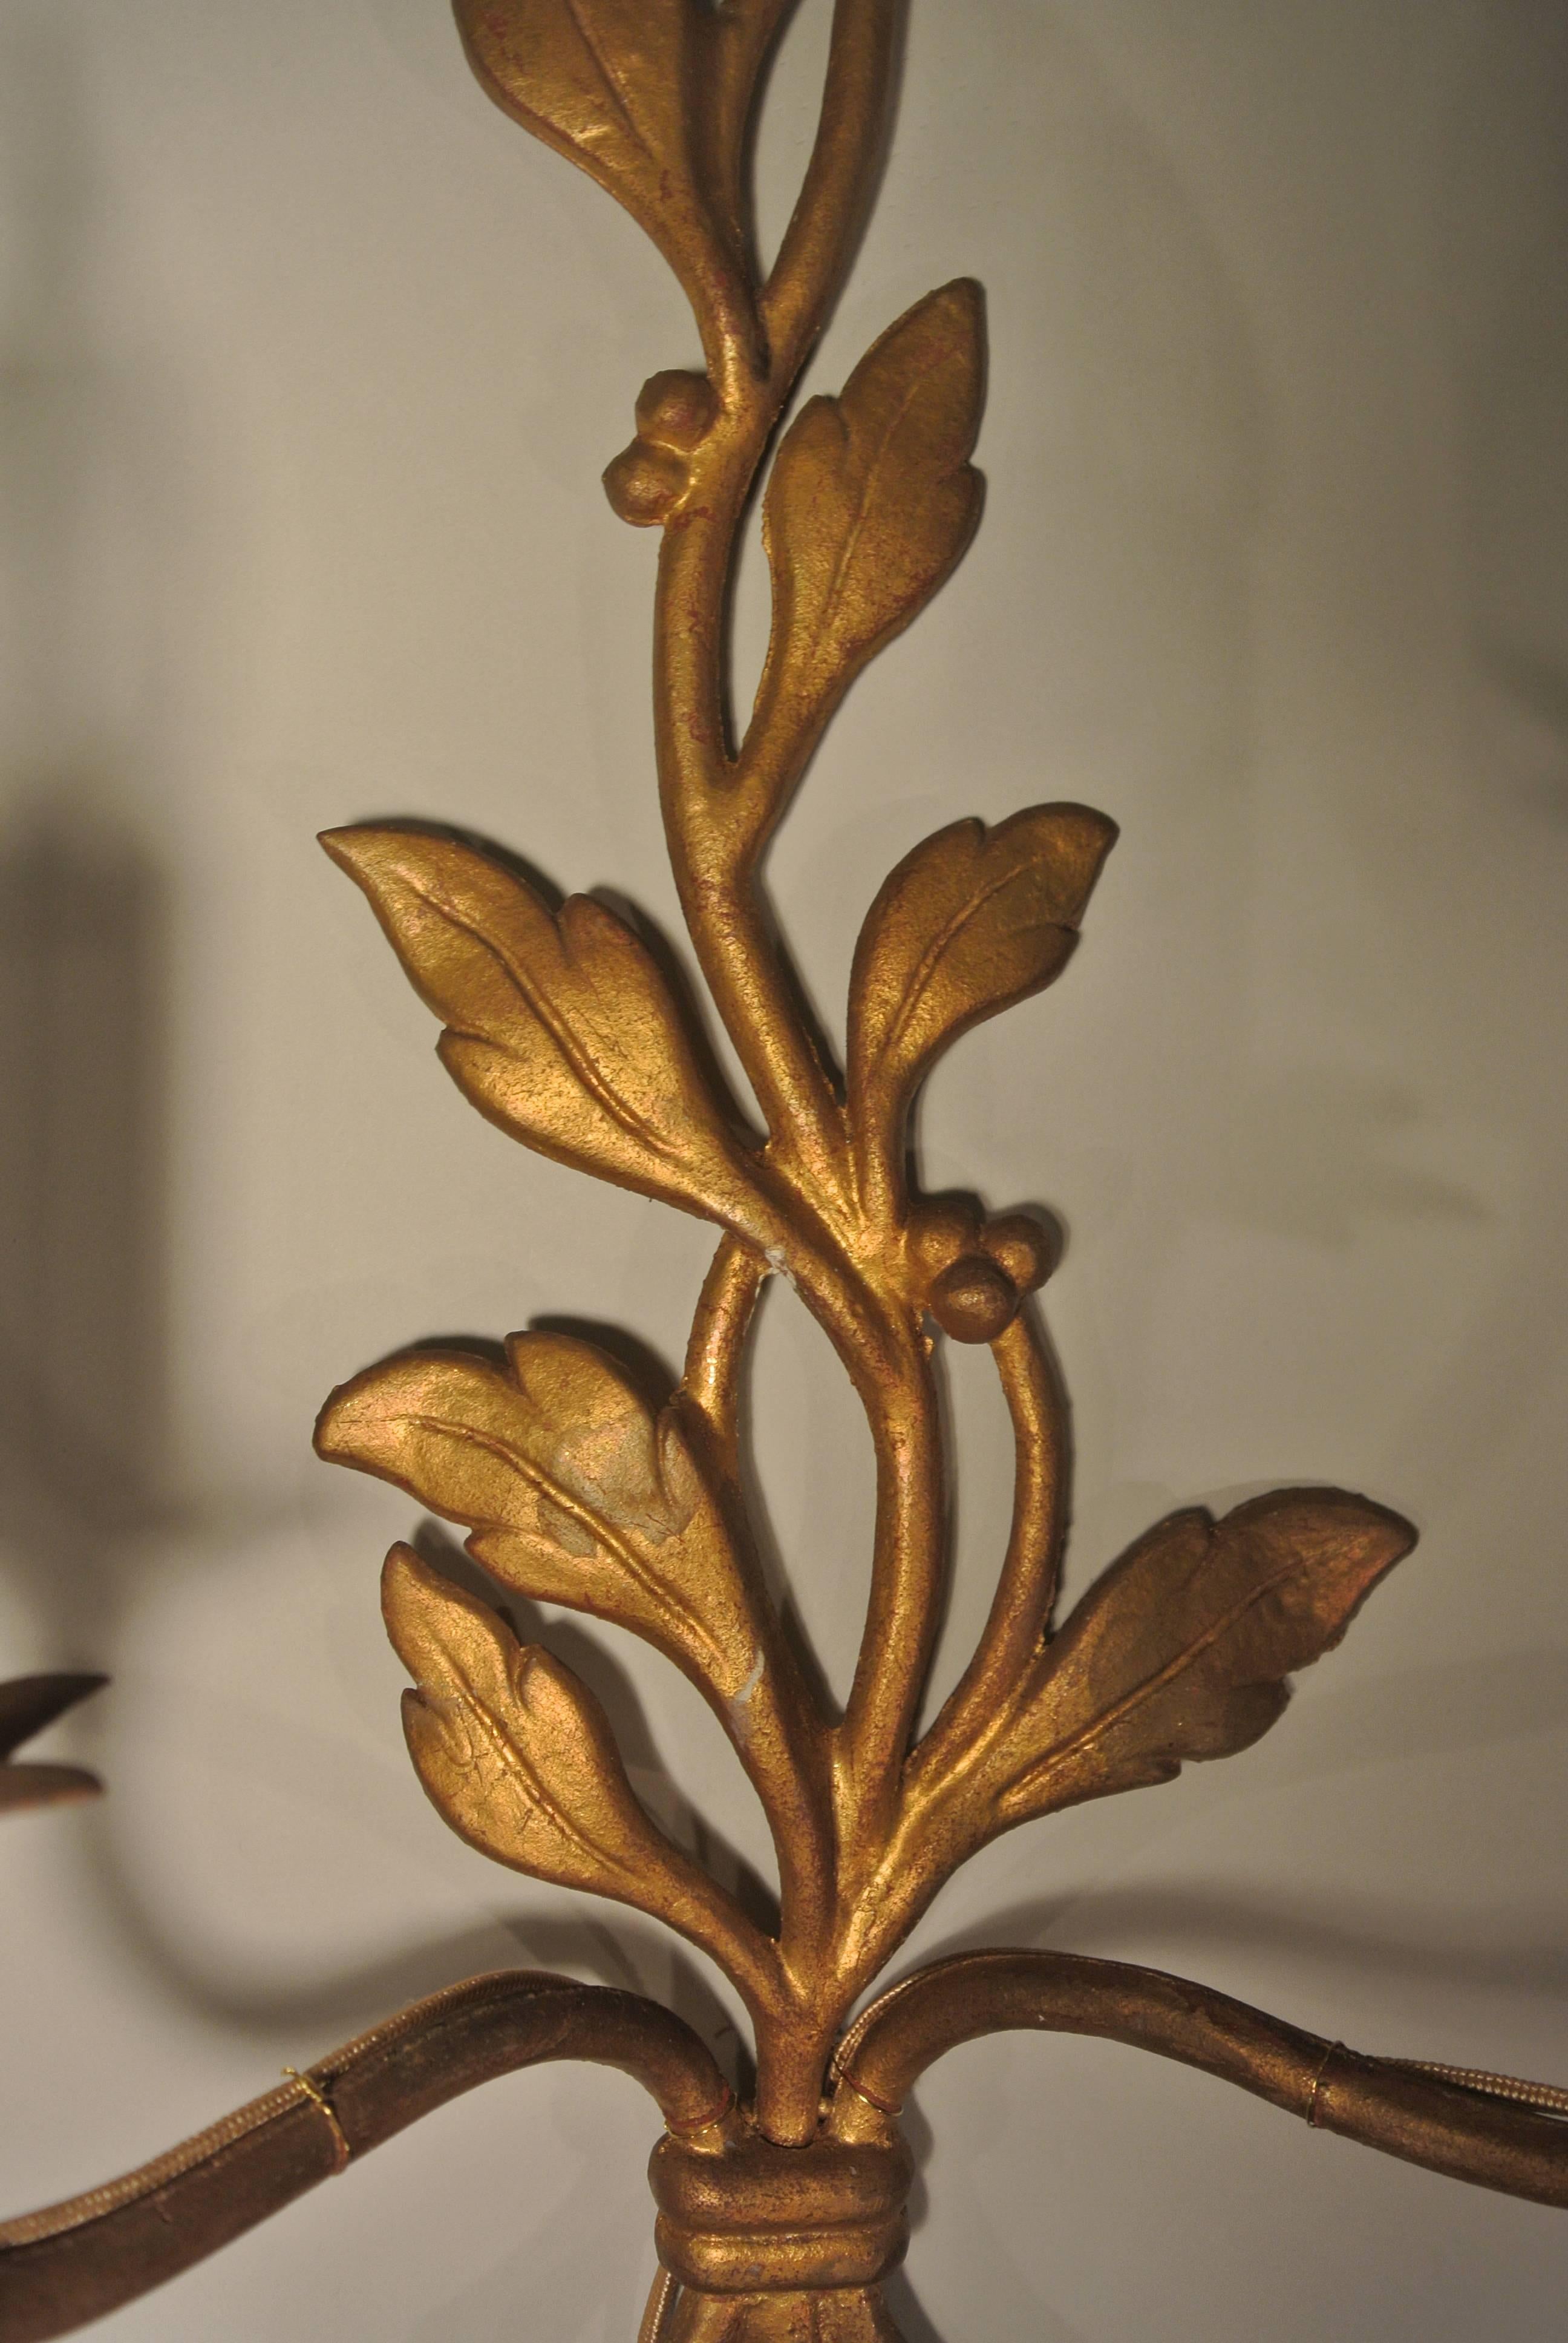 Pair of Mid-Century Modern Gold Gilt Bronze Sconces in a Leaf Design, circa 1960 For Sale 3